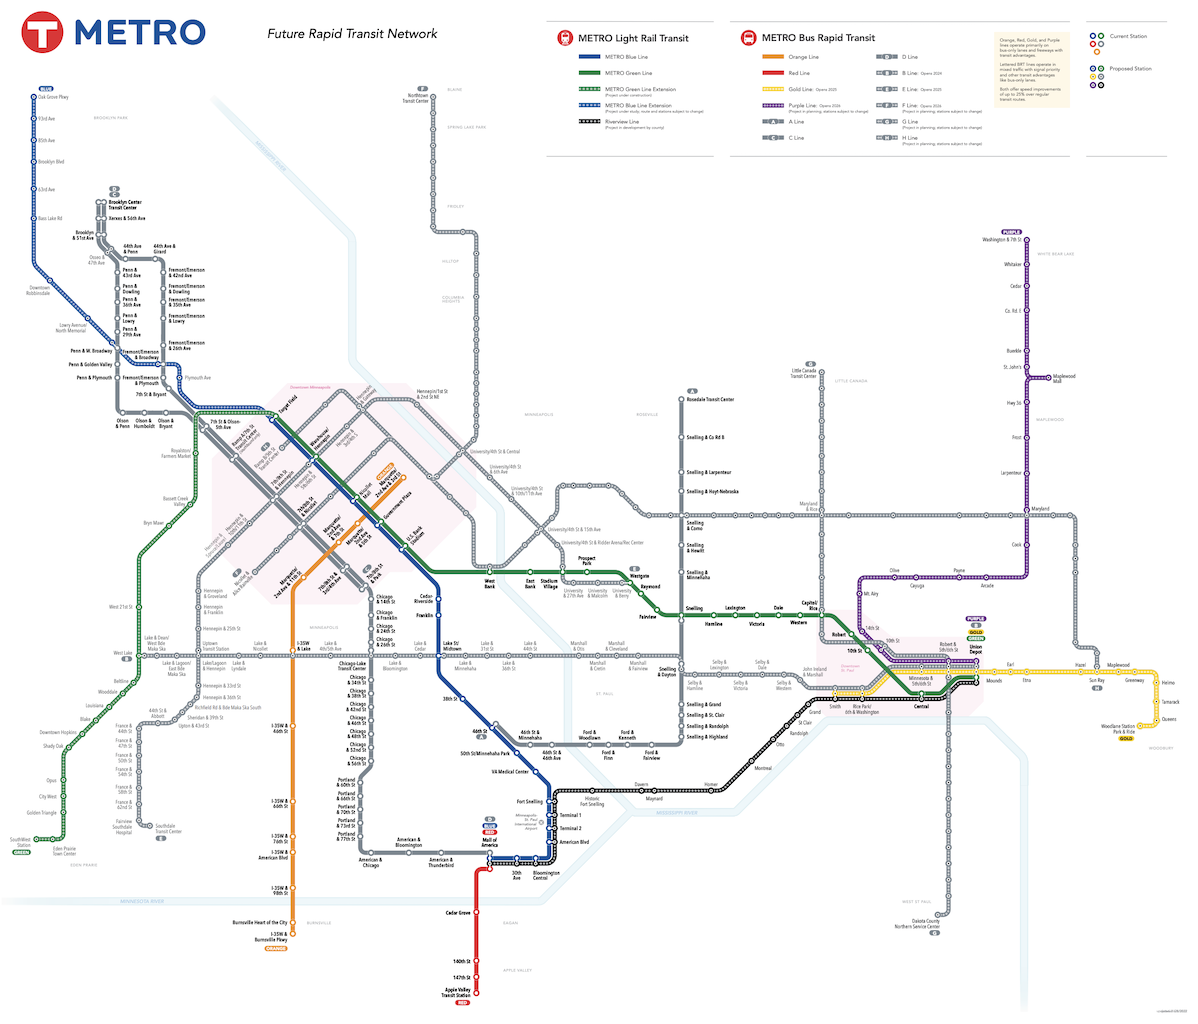 Map illustrating the future METRO network of light rail and bus rapid transit